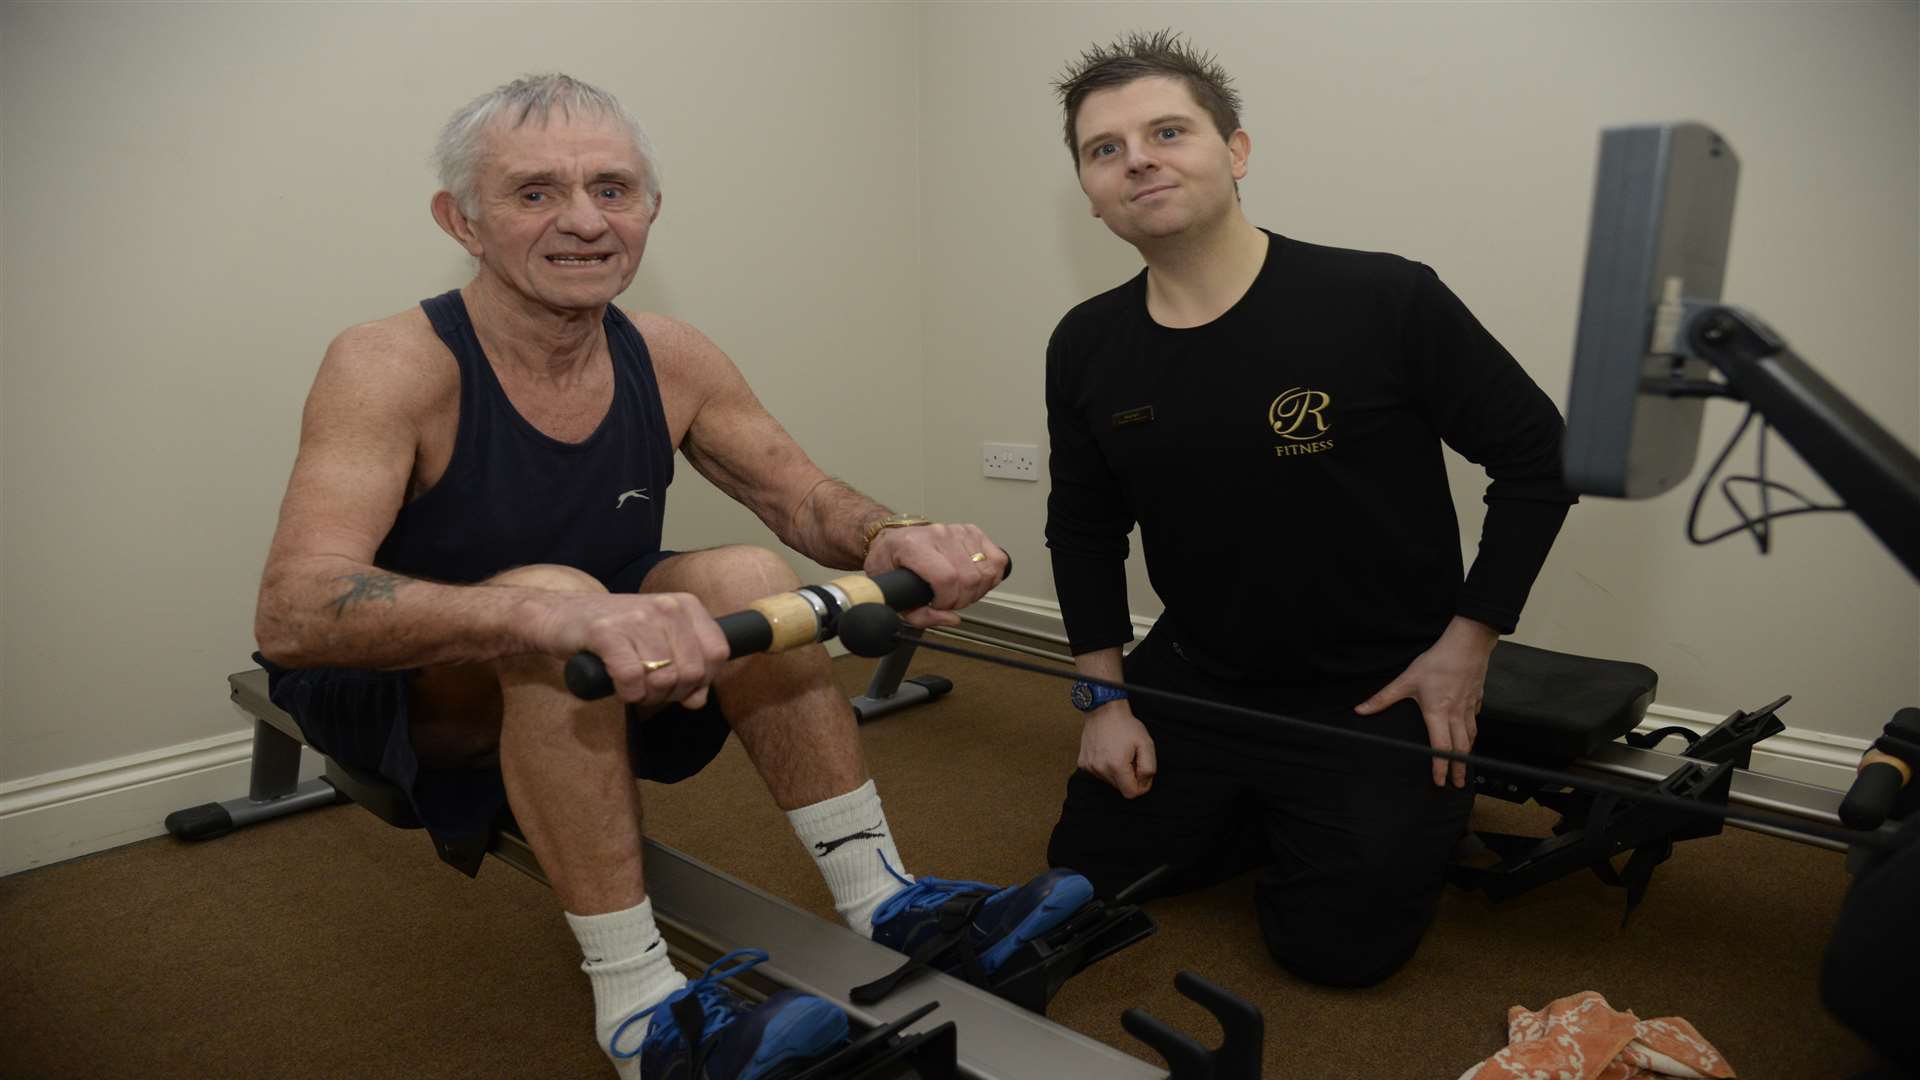 James Rutter, who suffered a stroke last year, with personal trainer Martyn Neaves